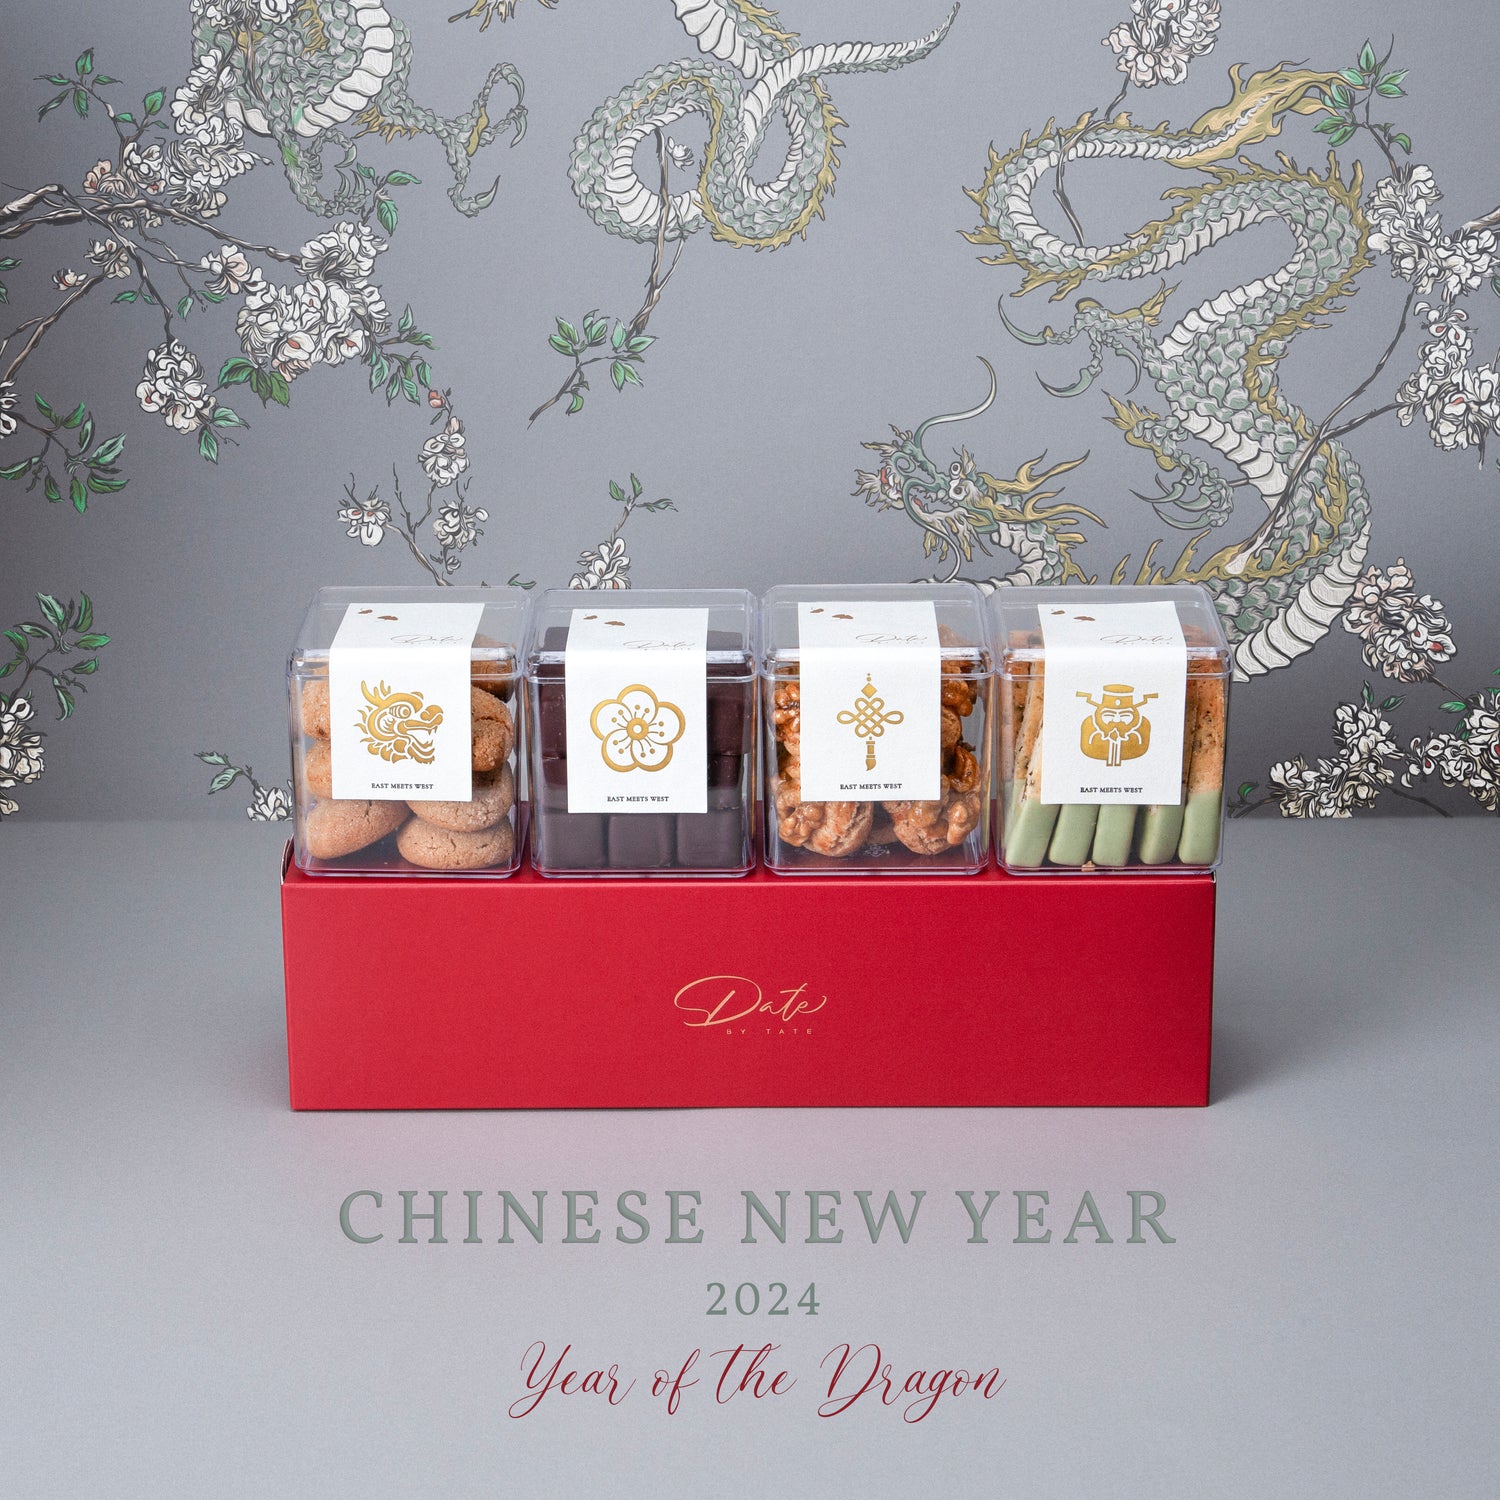 Chinese New Year Gift Idea